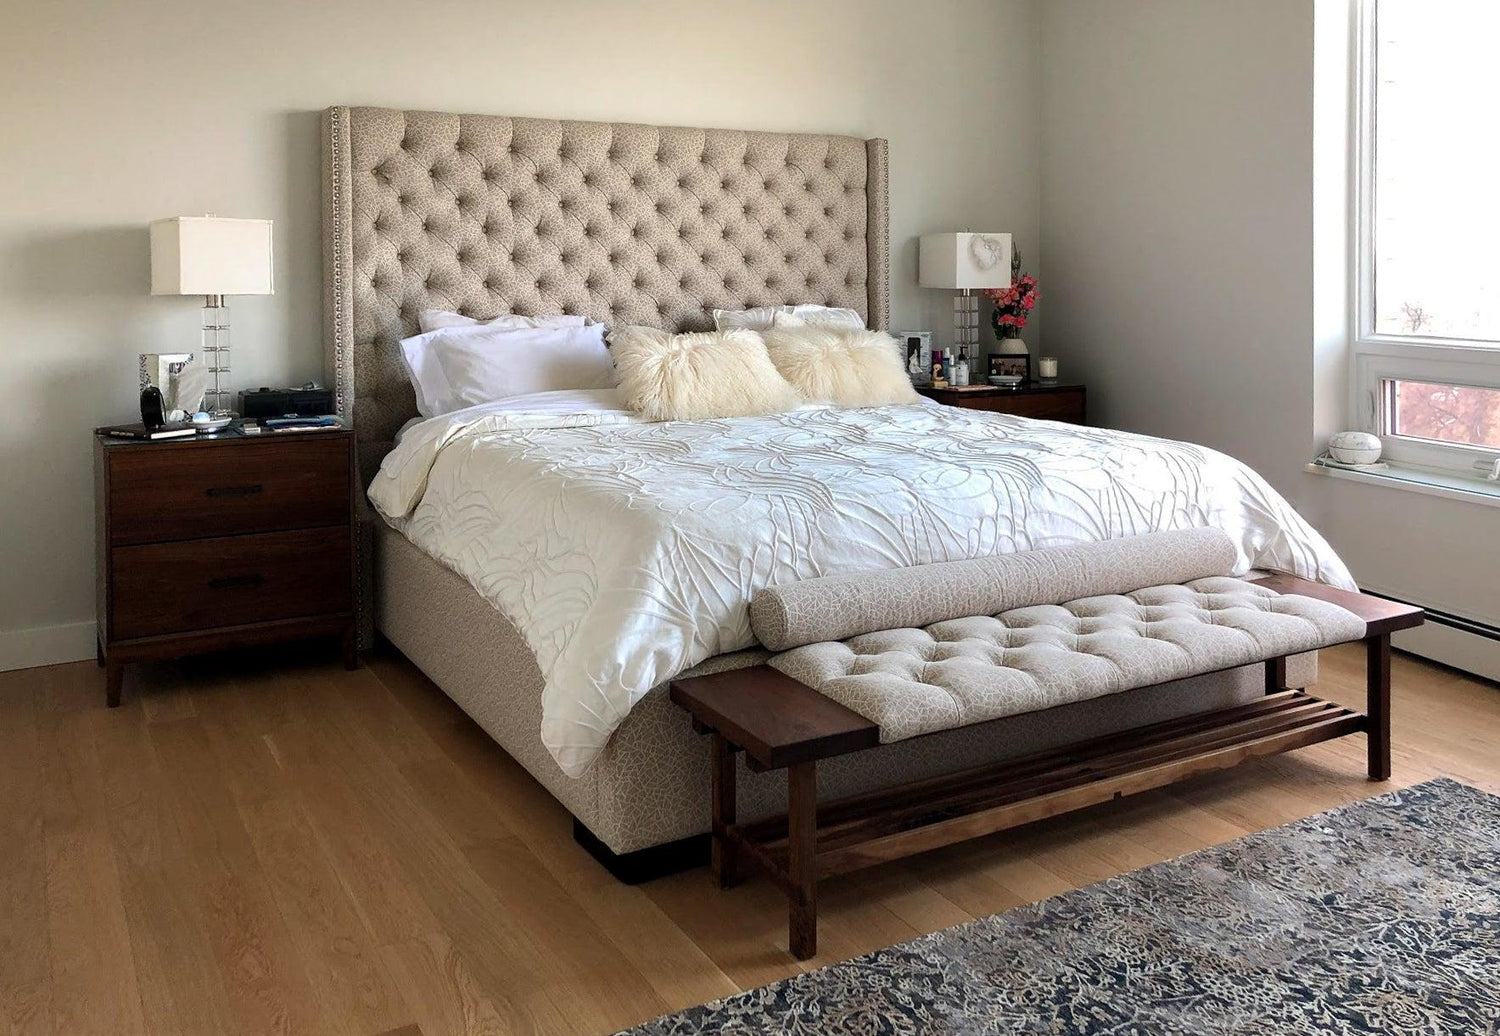 The custom walnut bedroom bench sitting at the foot of a bed. Its fabric matches that of the headboard, and its wood matches the side tables.